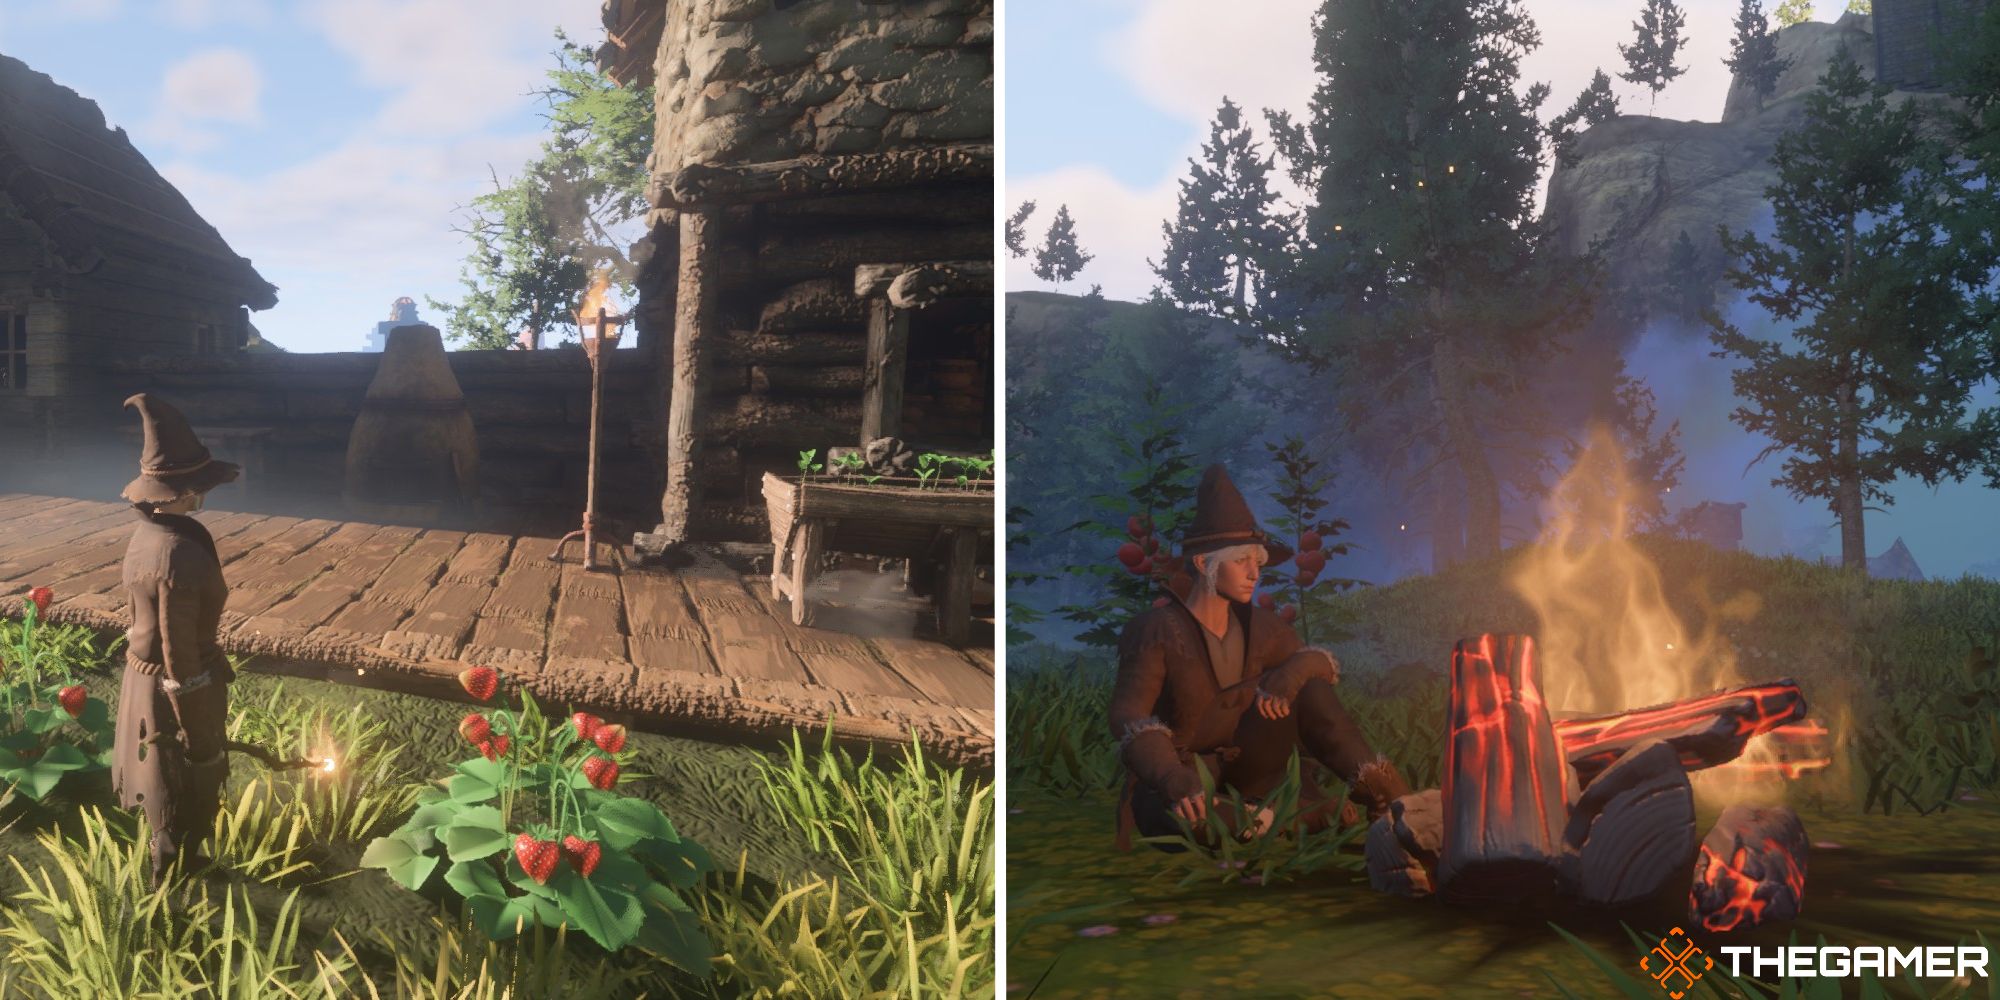 split image showing player next to strawberries and image of player sitting at campfire